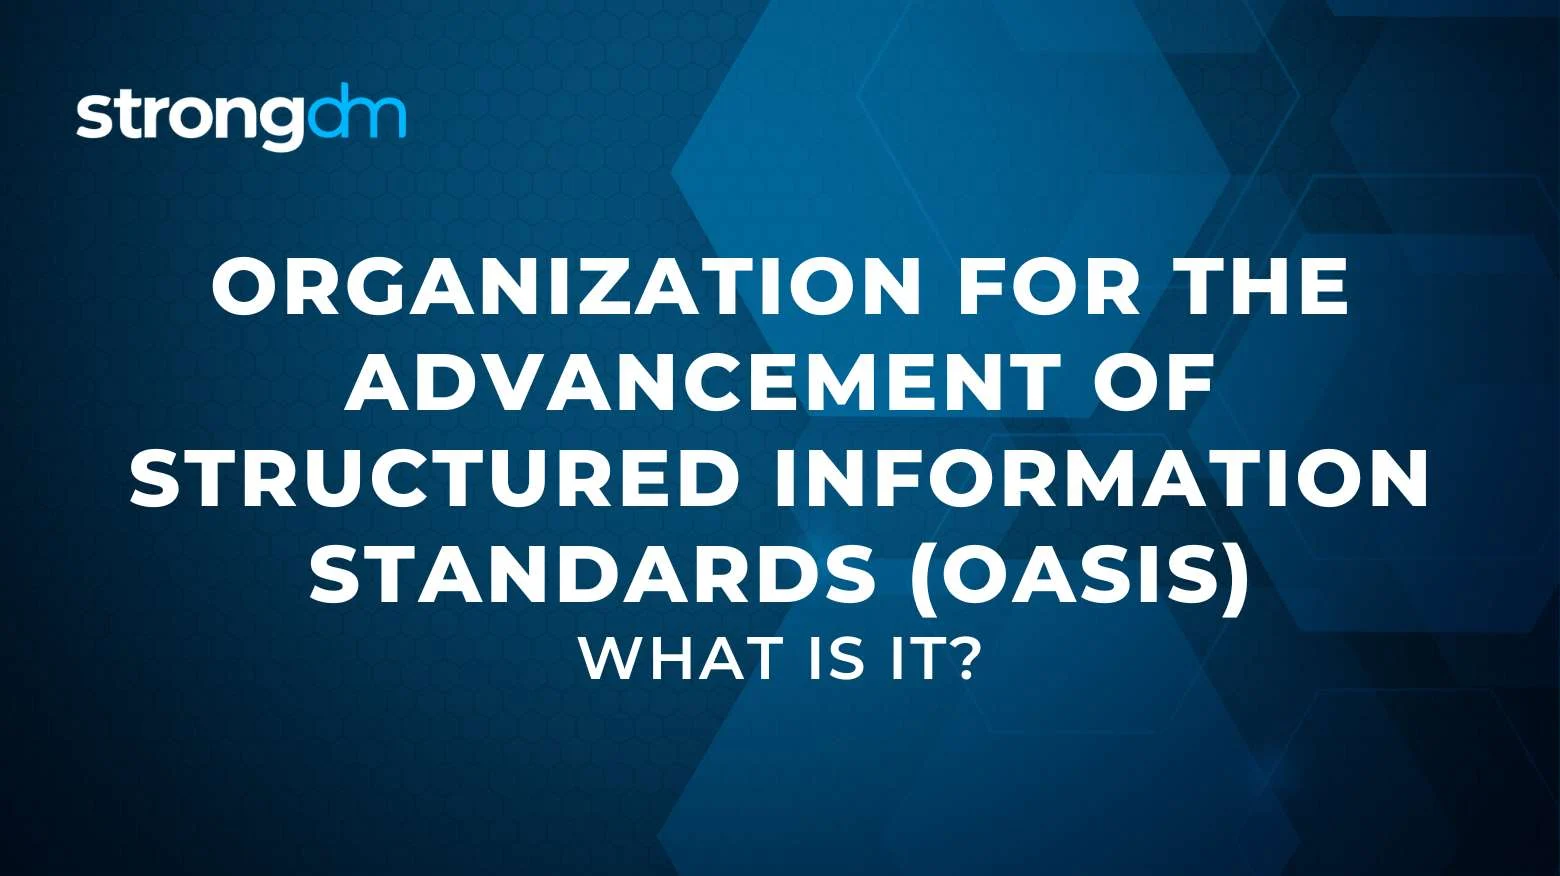 Organization for the Advancement of Structured Information Standards (OASIS) Explained